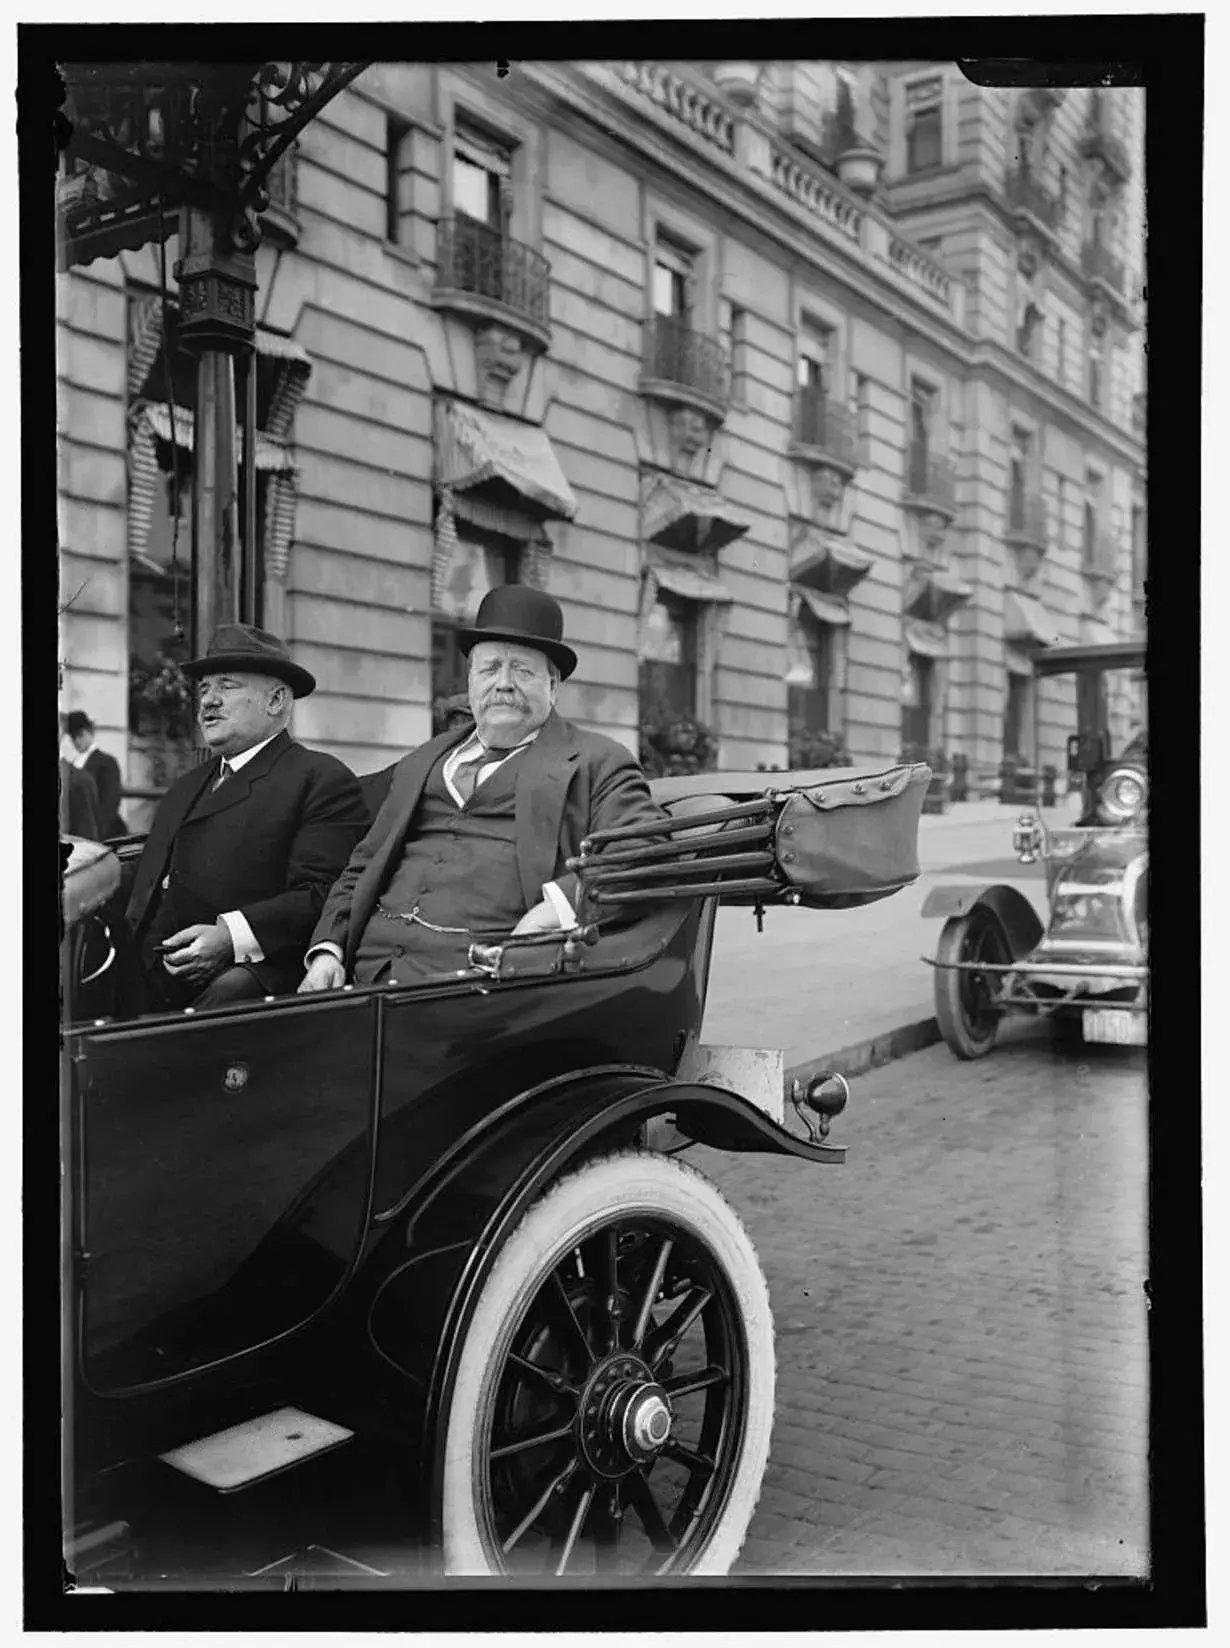 George Reid rides in the back of carriage with a top hat facing the camera.  